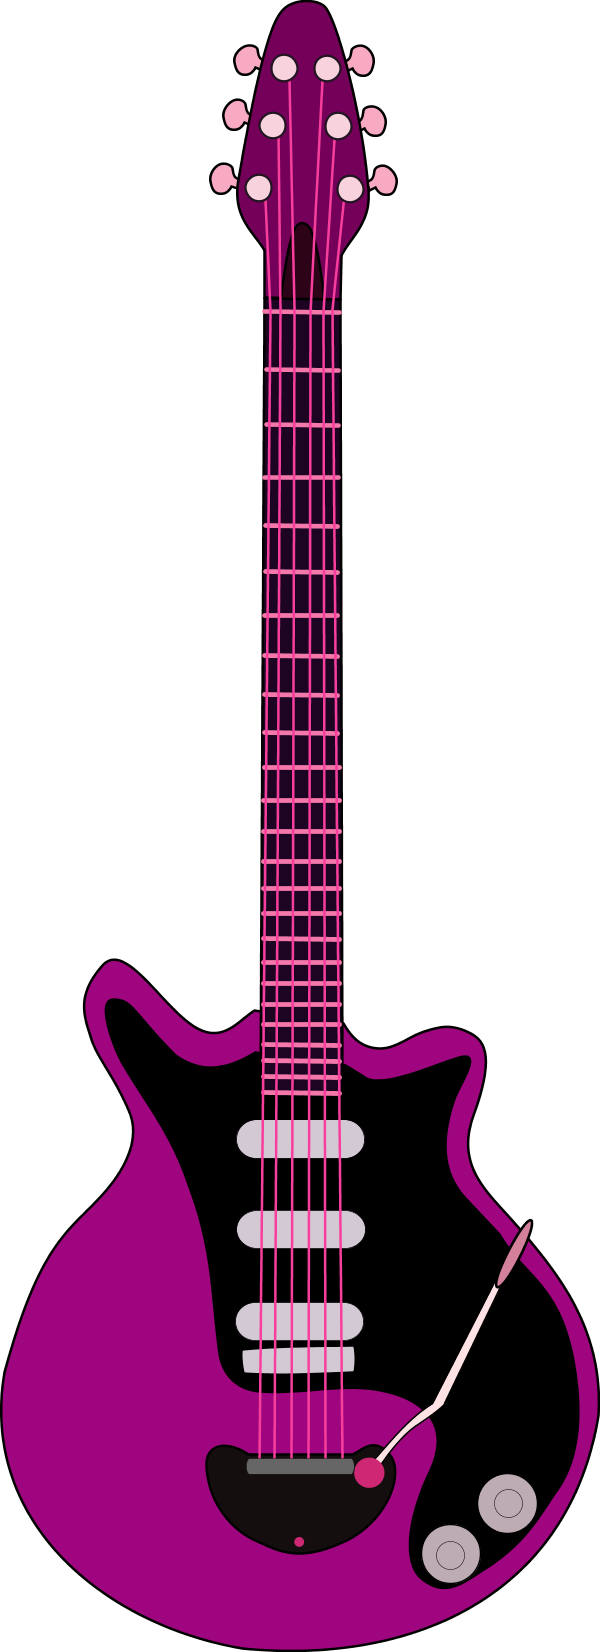 Mexico clipart colorful guitar. Rock and roll clip